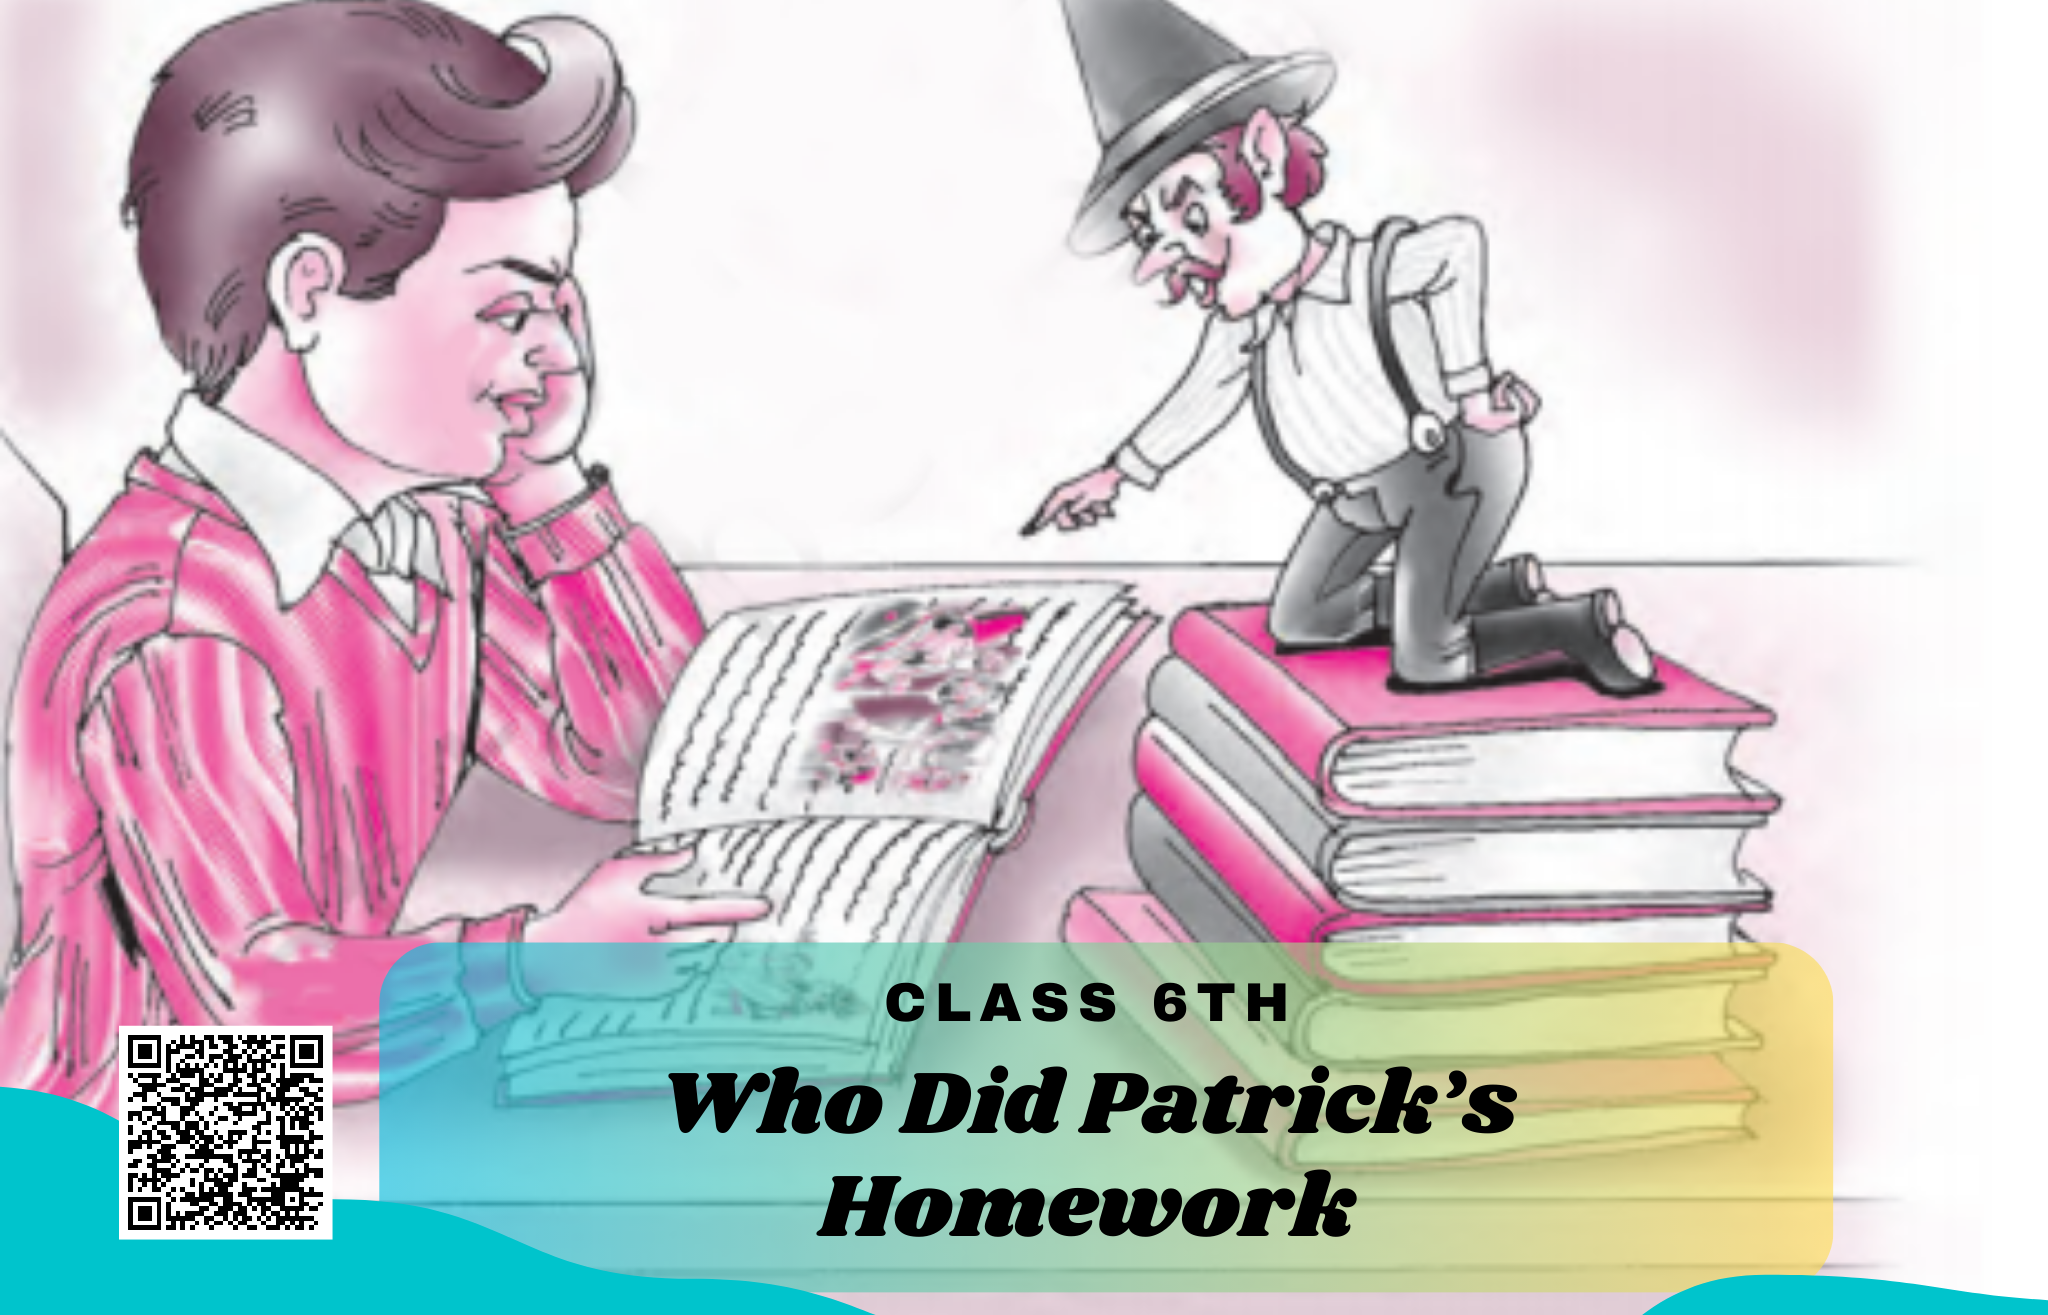 NCERT Solutions for Class 6 English Unit 1 – Who Did Patrick’s Homework